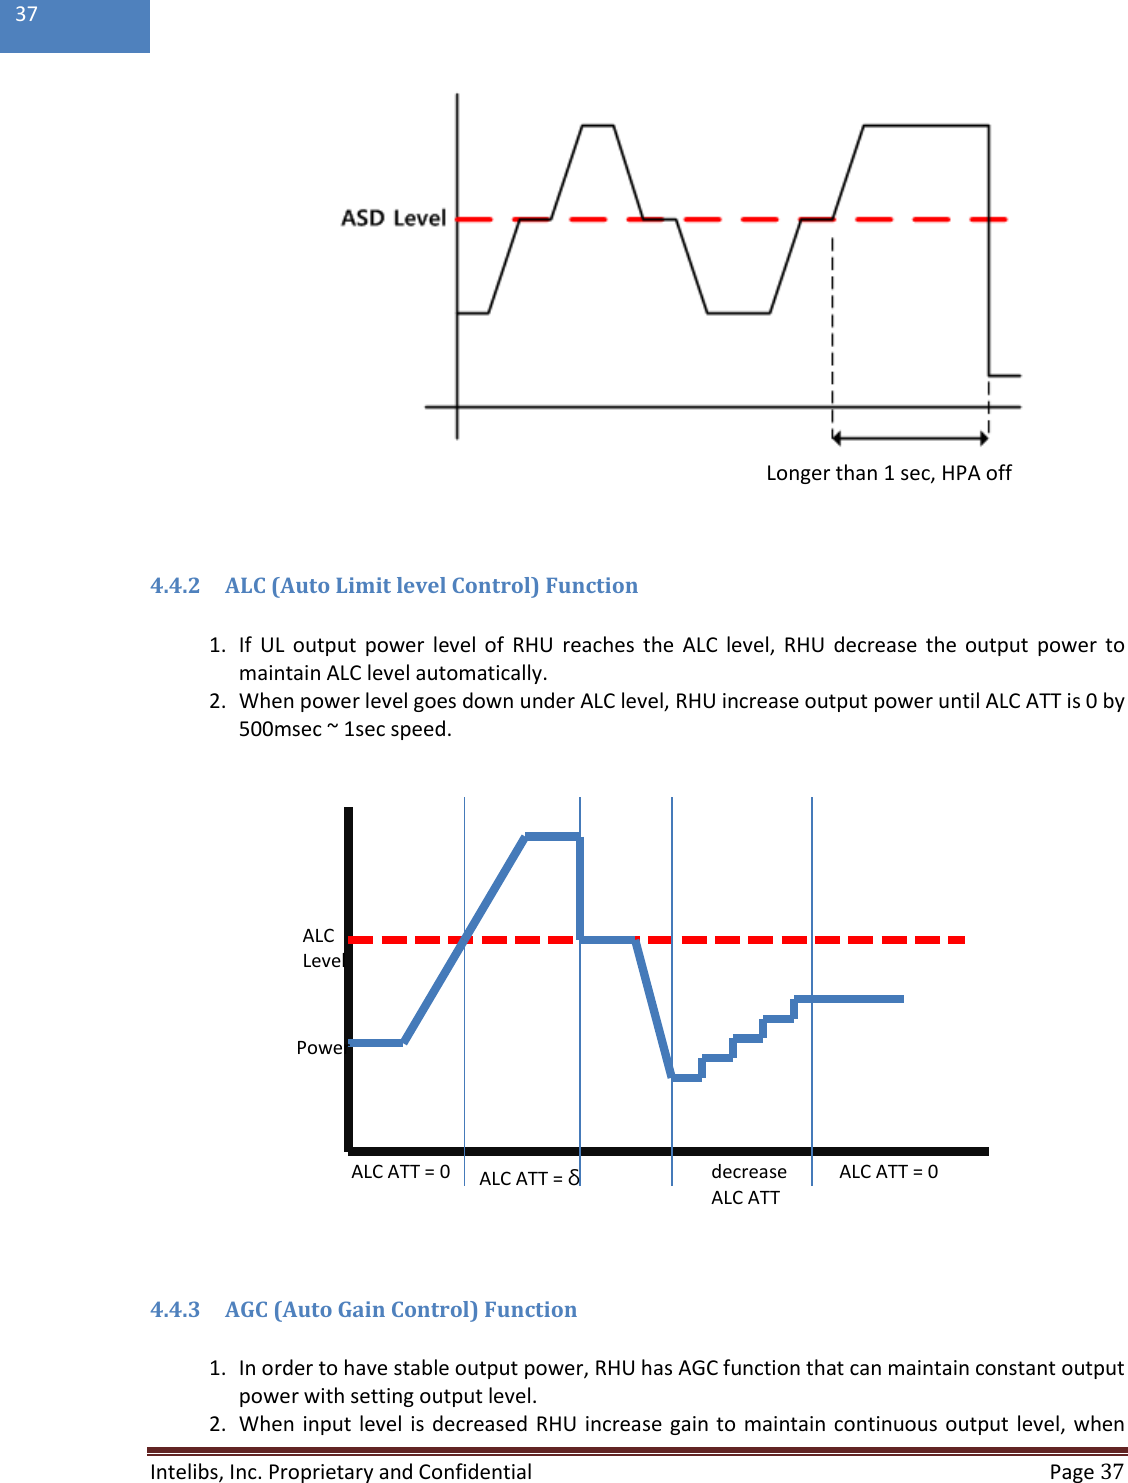  Intelibs, Inc. Proprietary and Confidential   Page 37  37    4.4.2 ALC (Auto Limit level Control) Function  1. If  UL  output  power level of  RHU  reaches the  ALC  level,  RHU  decrease the  output  power  to maintain ALC level automatically. 2. When power level goes down under ALC level, RHU increase output power until ALC ATT is 0 by 500msec ~ 1sec speed.    4.4.3 AGC (Auto Gain Control) Function  1. In order to have stable output power, RHU has AGC function that can maintain constant output power with setting output level.   2. When input level is decreased RHU increase gain to maintain continuous output level, when ALC Level Power ALC ATT = 0 ALC ATT = δ decrease ALC ATT ALC ATT = 0 Longer than 1 sec, HPA off 